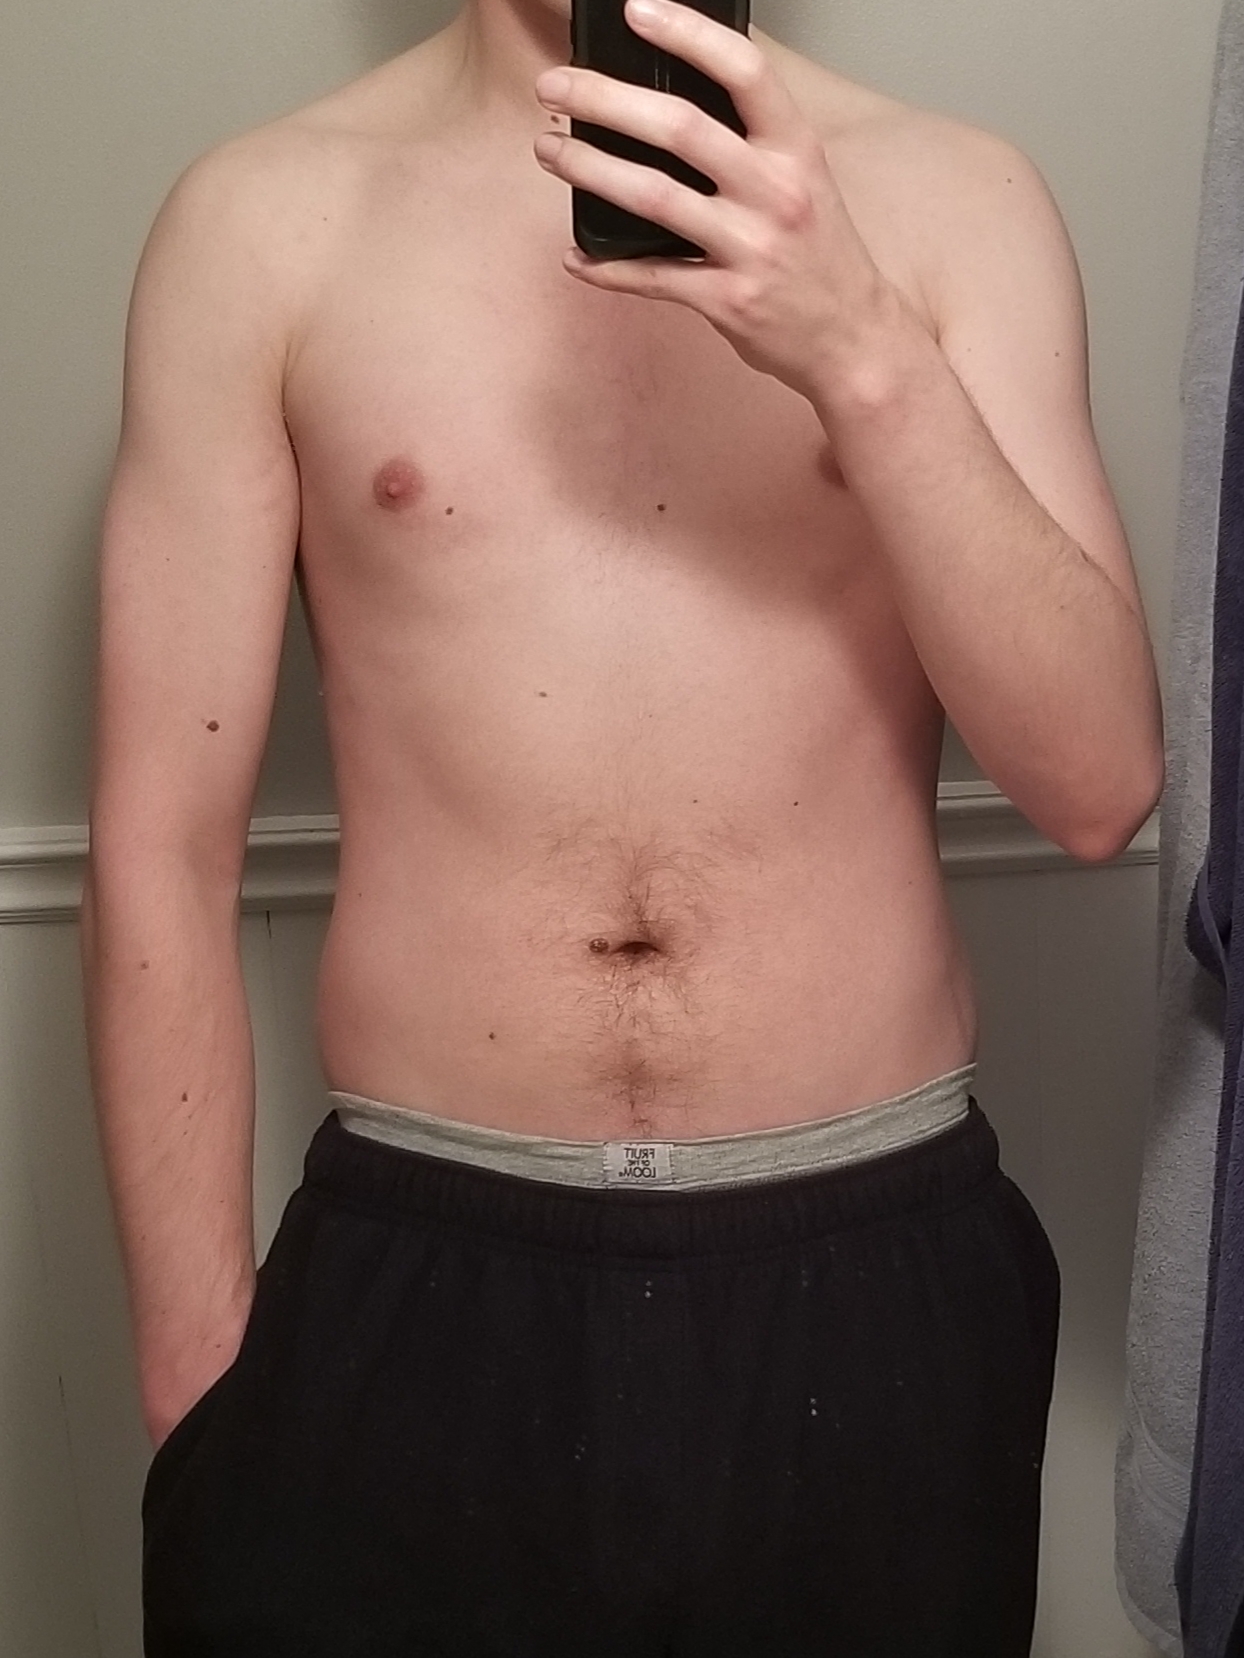 I've been working out over the last few months. Starting to see some decent progress that I am happy with!